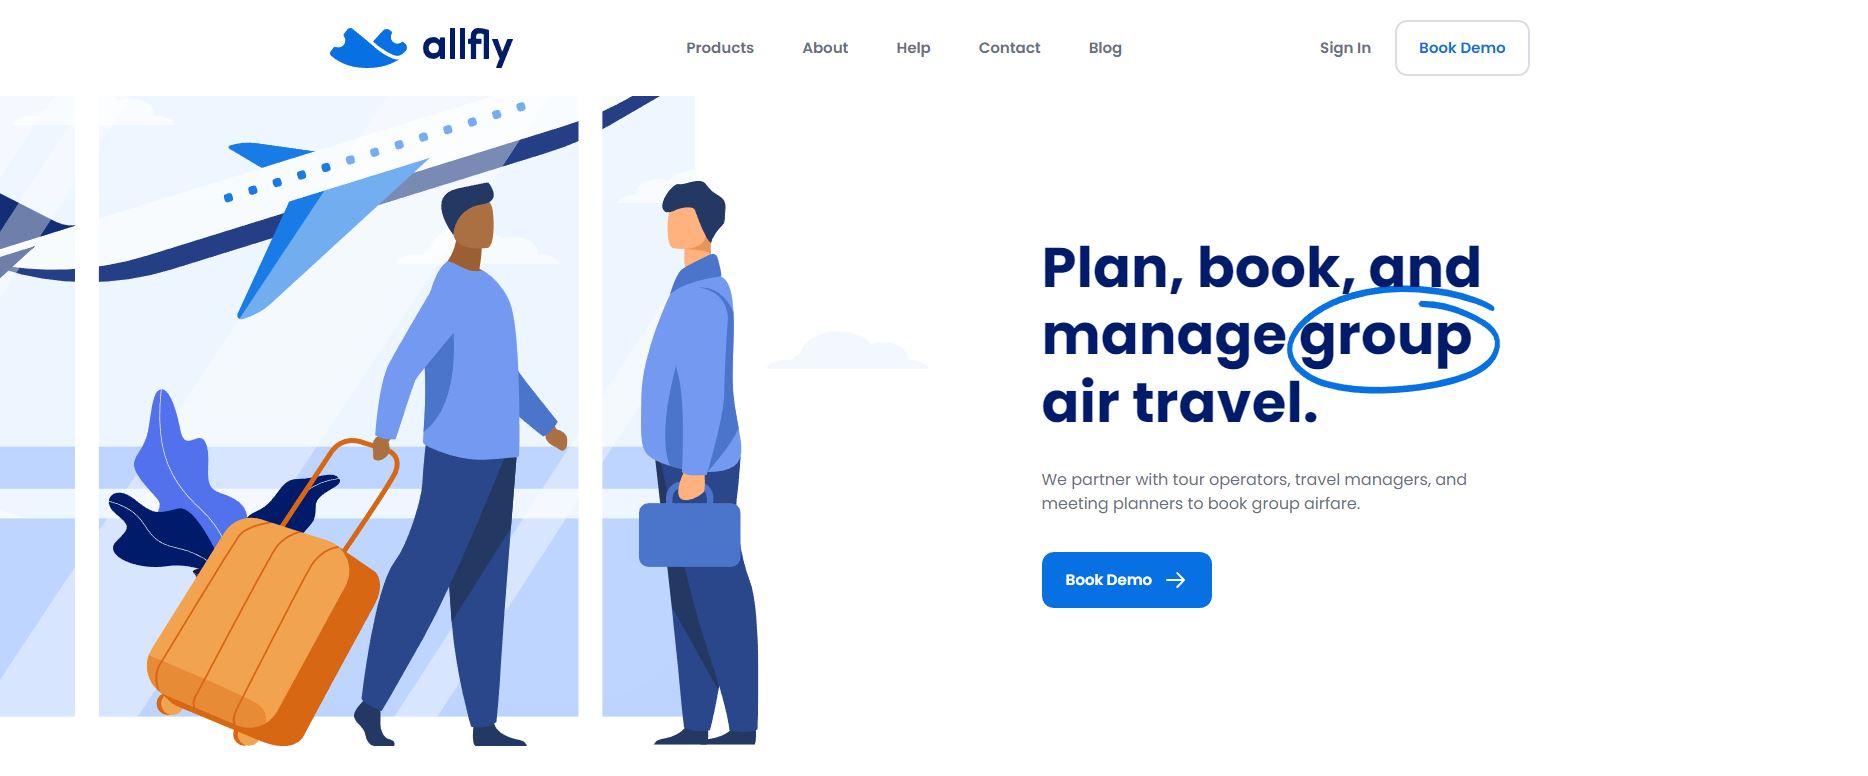 AllFly, founded by Eric Peterson is revolutionizing the way we plan travel arrangements. Also, they raised $2.4M